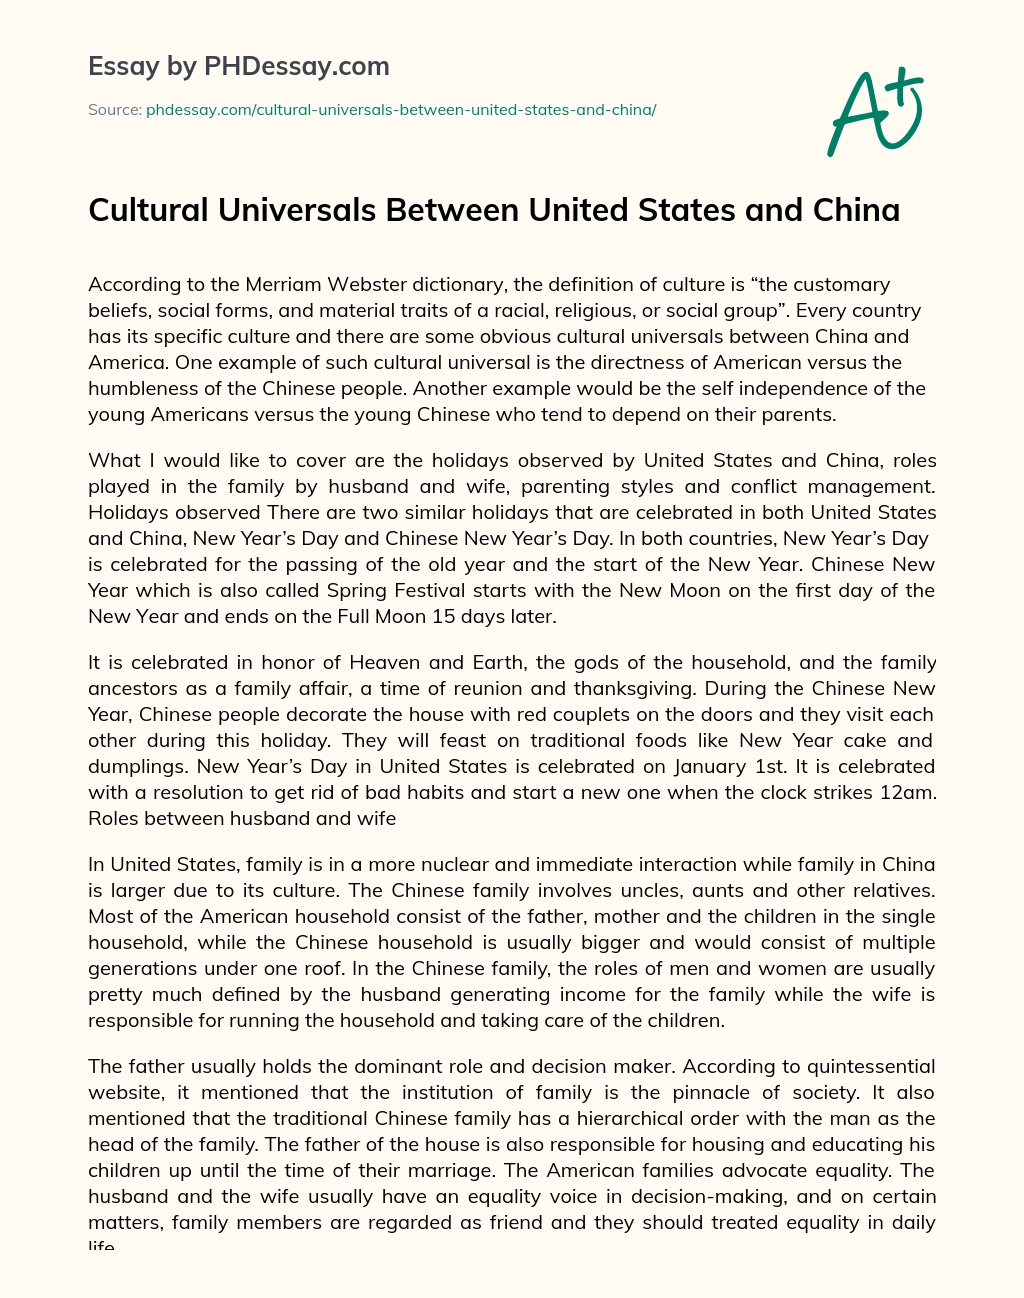 Cultural Universals Between United States and China essay